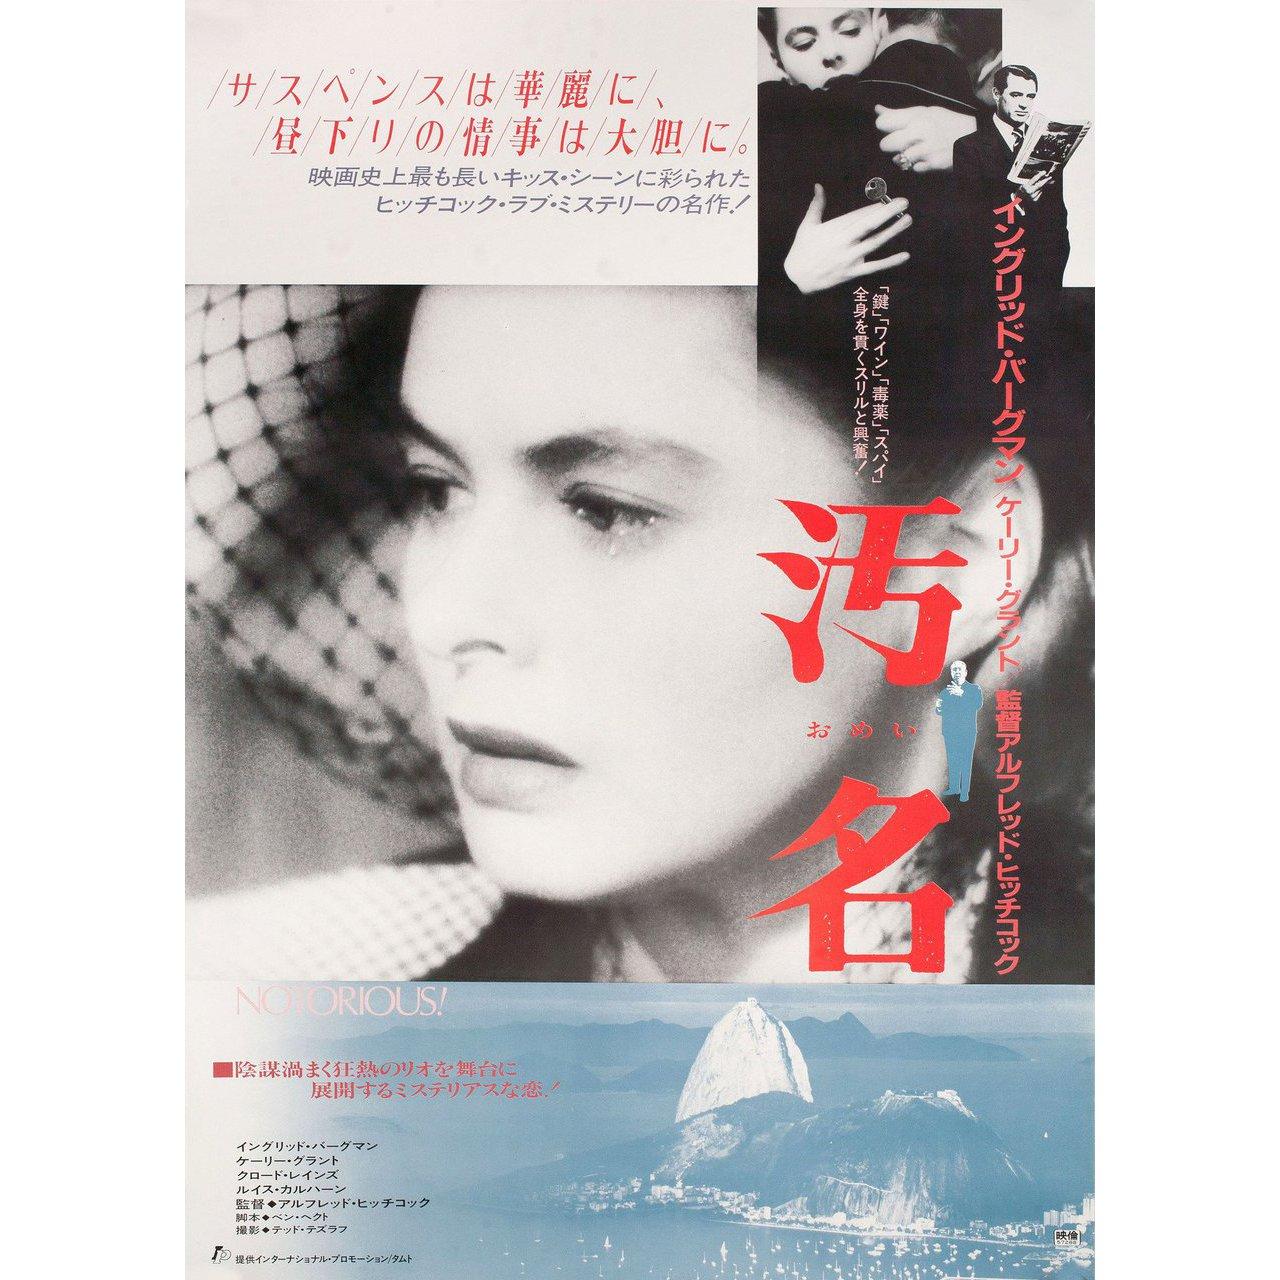 Original 1982 re-release Japanese B2 poster for the 1946 film Notorious directed by Alfred Hitchcock with Cary Grant / Ingrid Bergman / Claude Rains / Louis Calhern. Very good-fine condition, rolled. Please note: the size is stated in inches and the